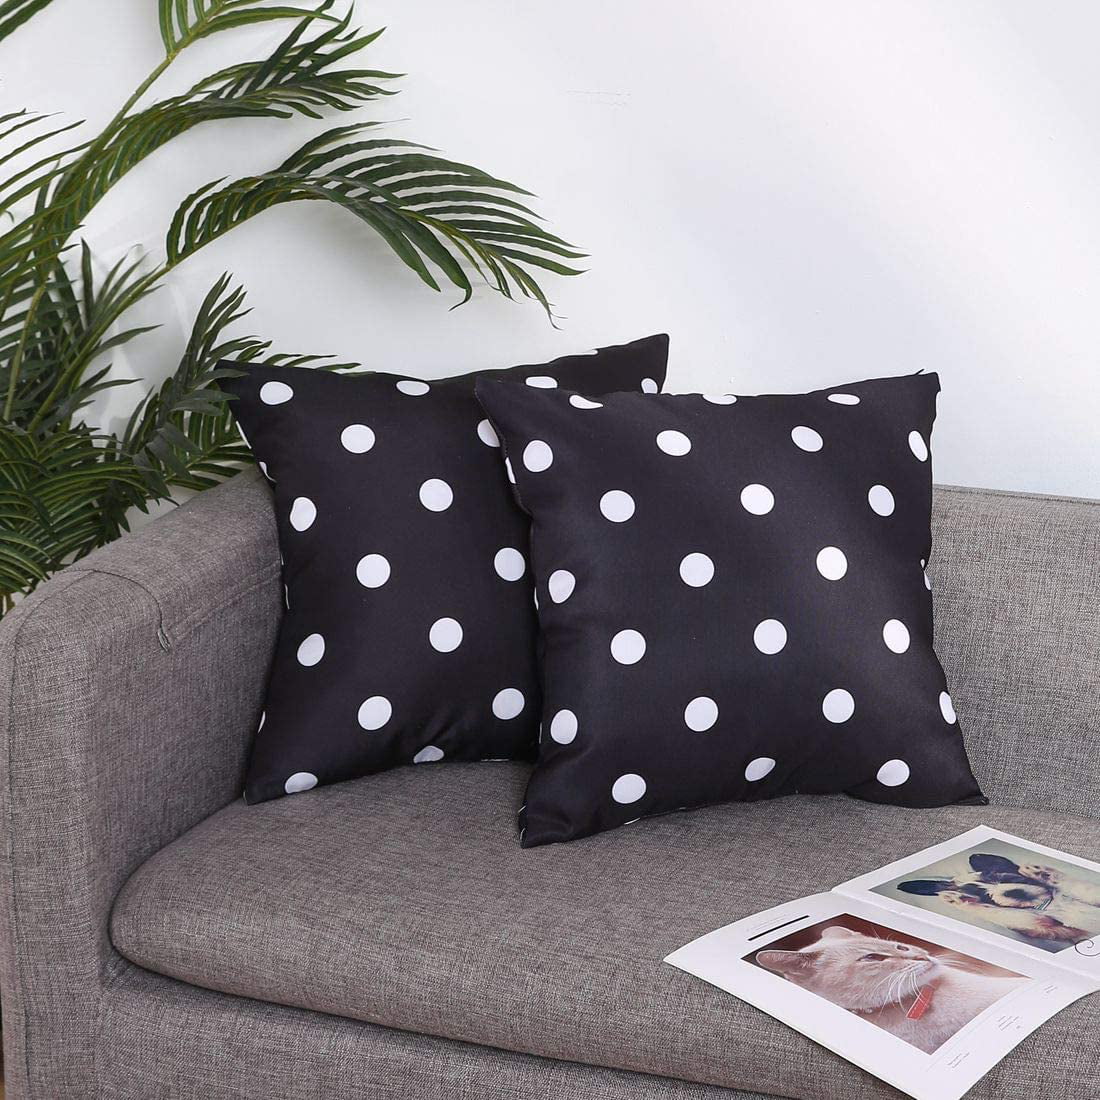 Couch Black Polka Dot Living Room 18X18 Inches Patio Poise3EHome Outdoor Throw Pillow Covers Set of 2 Waterproof Decorative Pillow Covers for Halloween Spring Summer